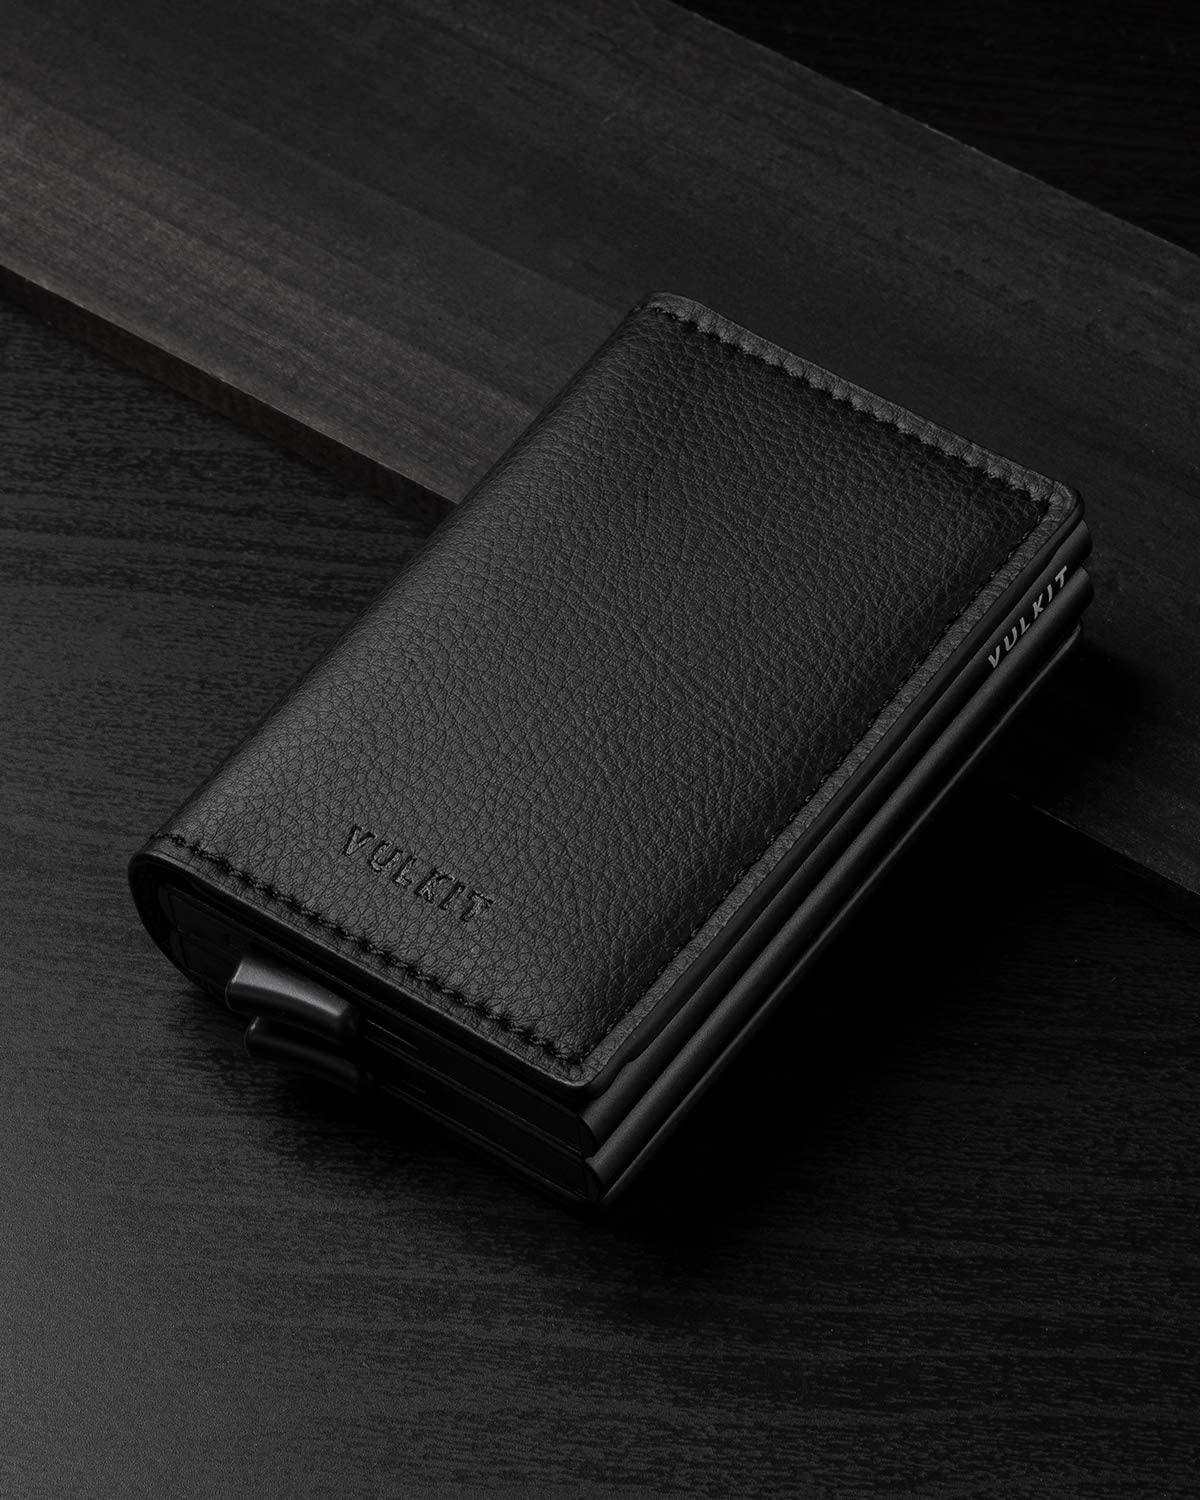 VULKIT Pop Up Wallet Automatic Leather Slim Credit Card Holder RFID  Blocking Metal Double Card Case for Men and Women Carbon Fiber Black